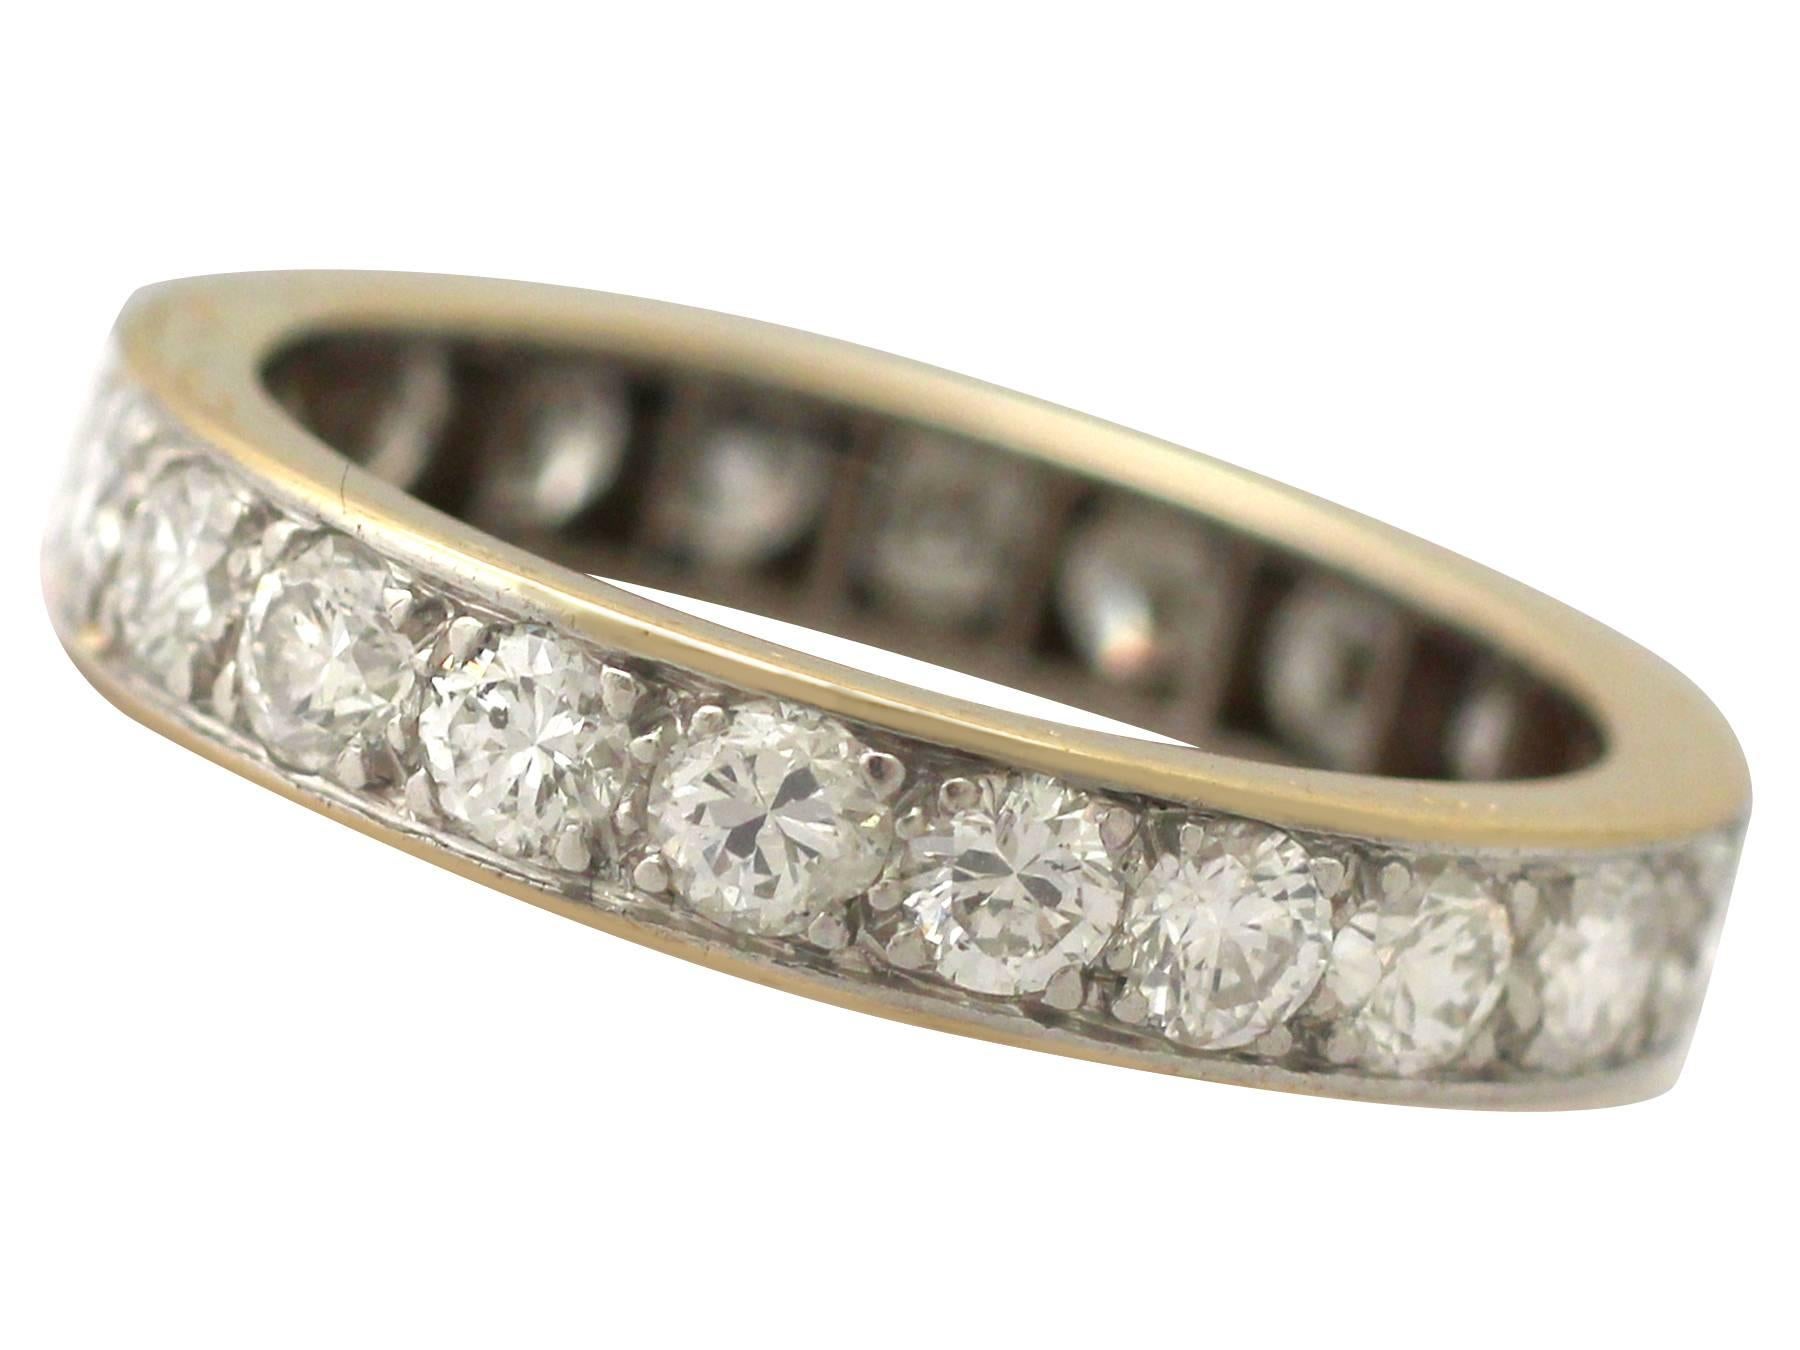 This exceptional, fine and impressive vintage full eternity ring has been crafted in 18k yellow gold with a a platinum setting.

The ring is embellished with twenty-one transitional modern brilliant round cut diamonds, pavé set within a platinum